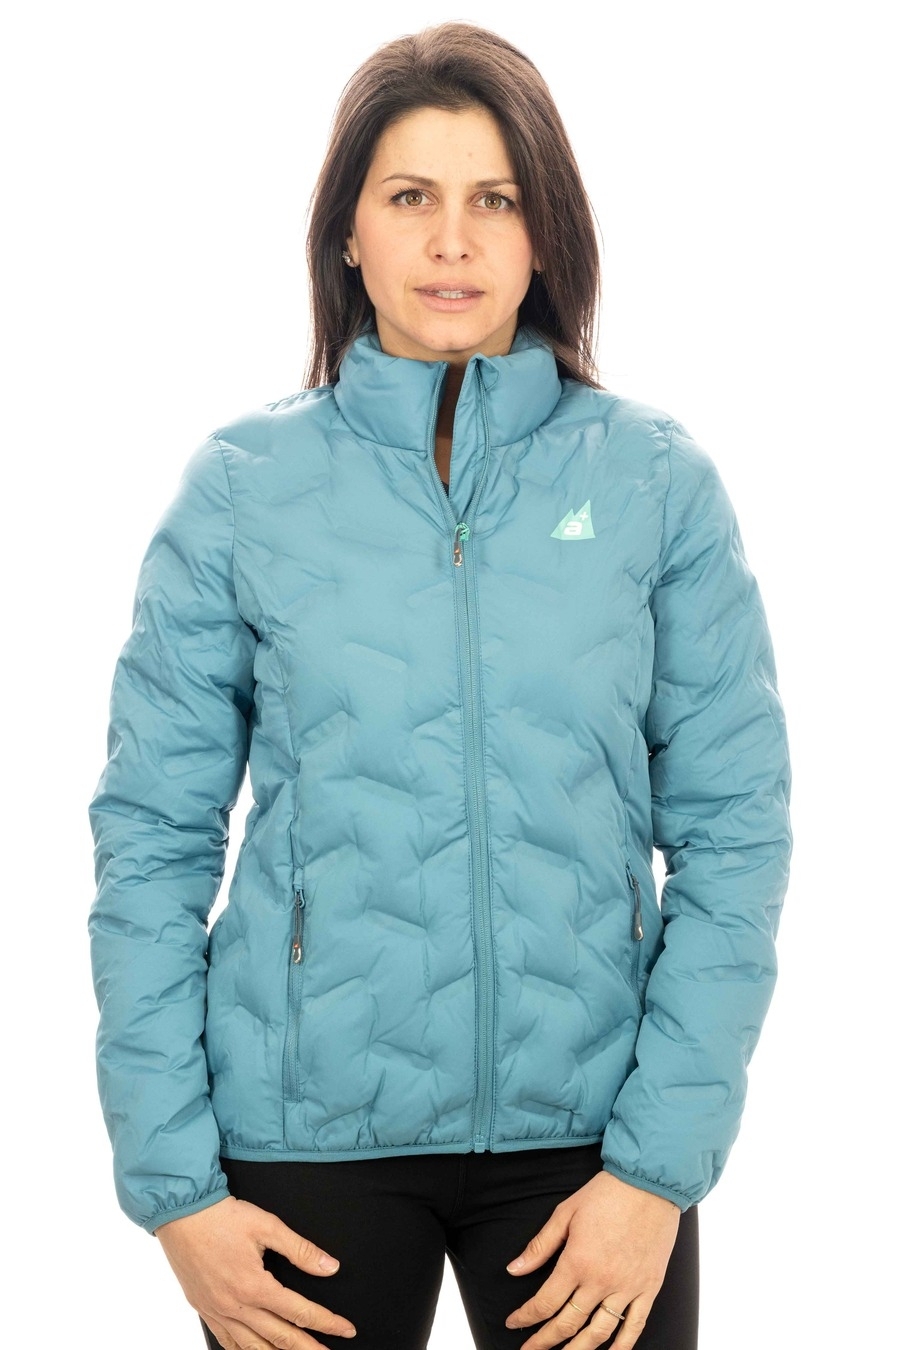 Woman Thermal, Breathable, Water-repellent Jacket - Trekking and Outdoor [a3d1d187]